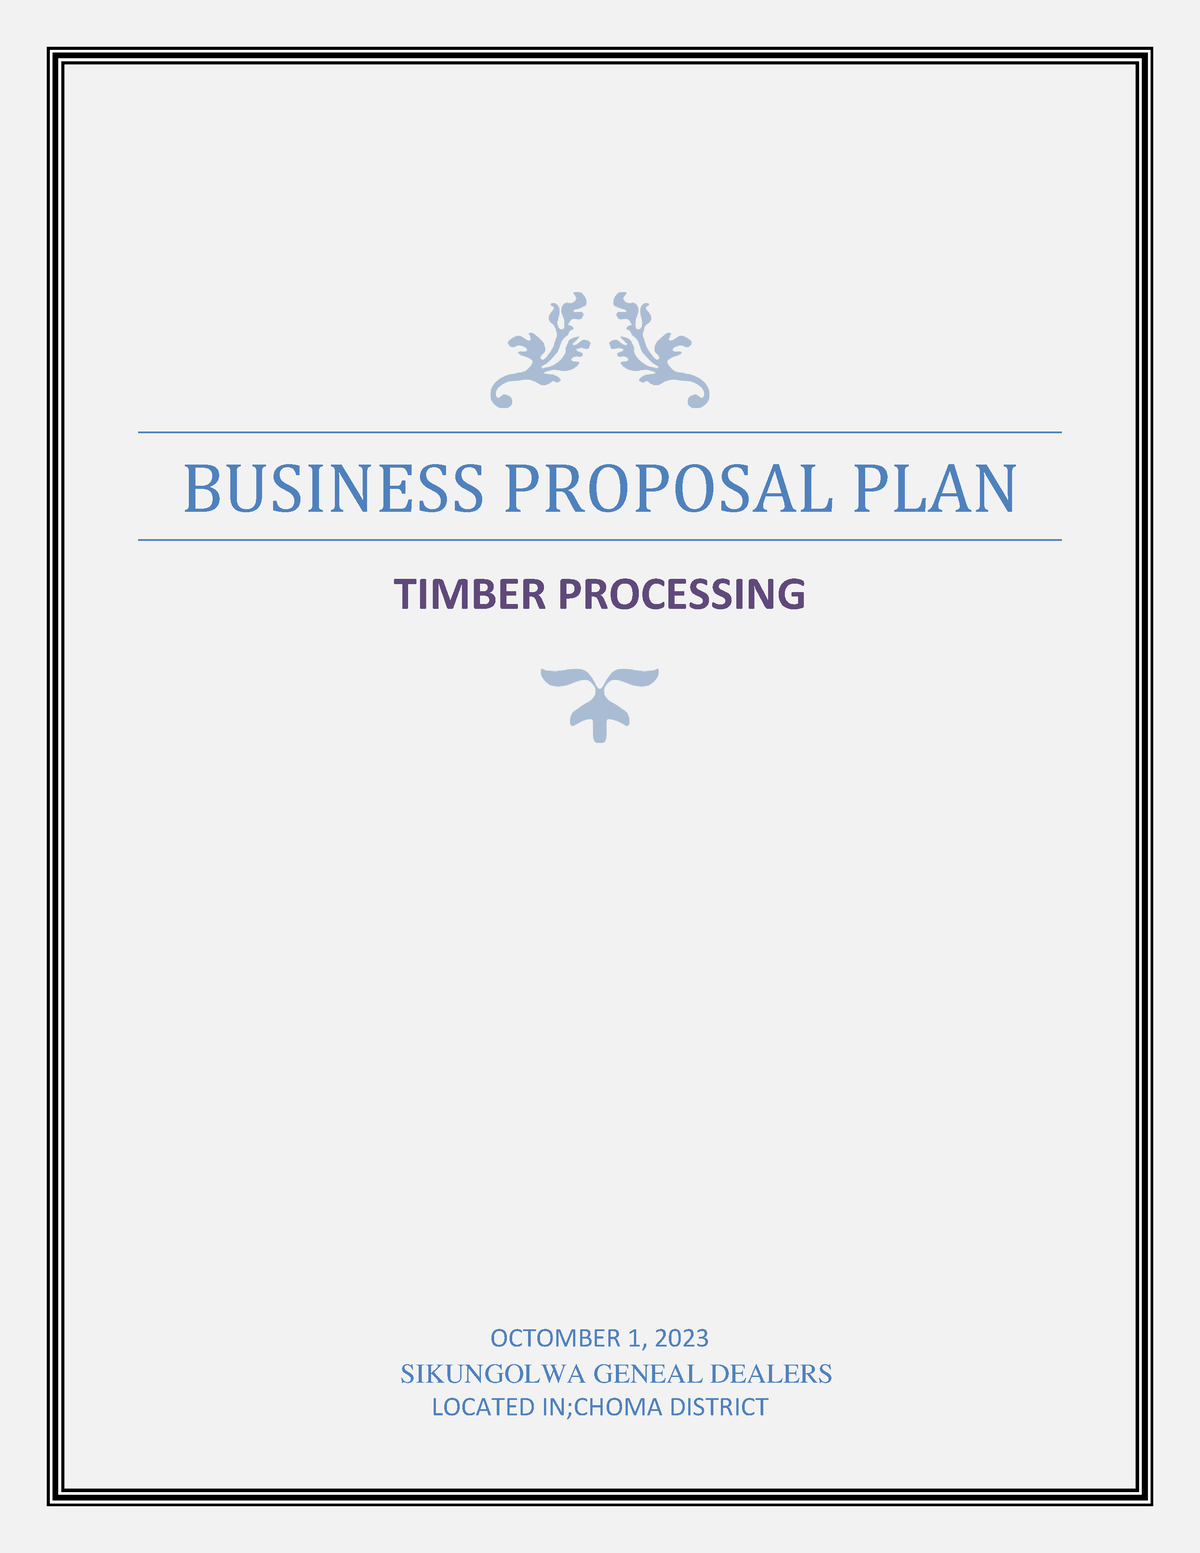 timber business plan in india